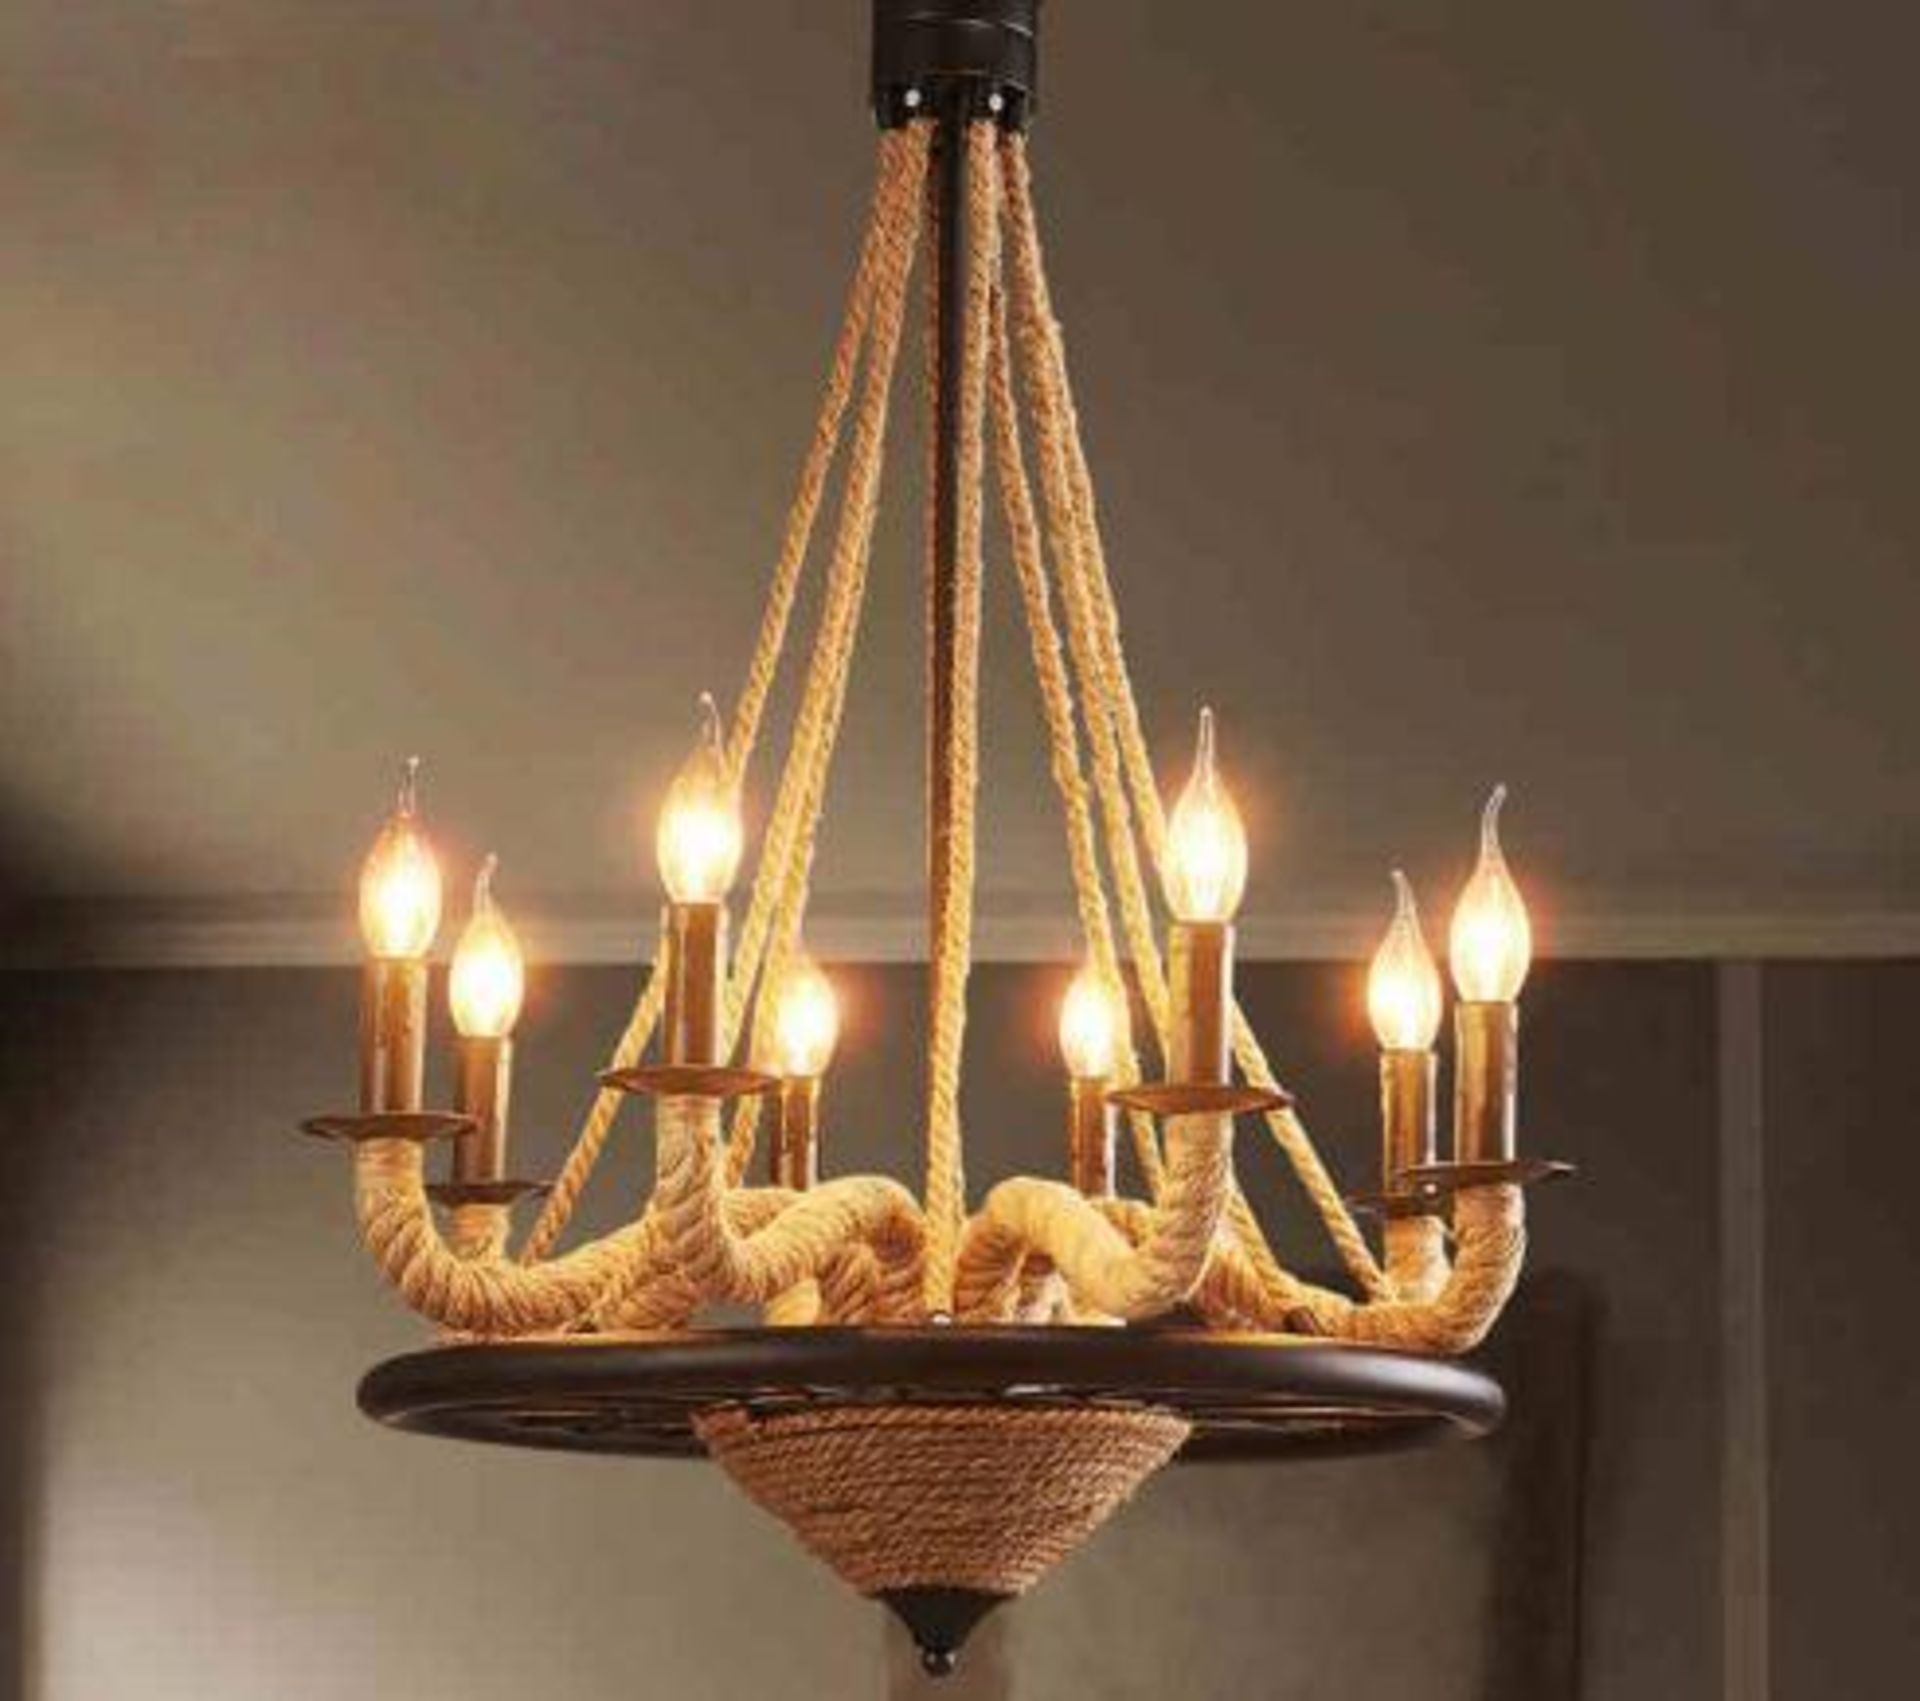 NEW Unique Vintage Style Retro Rope / Metal Chandelier (Bulbs NOT Included) - Image 3 of 6